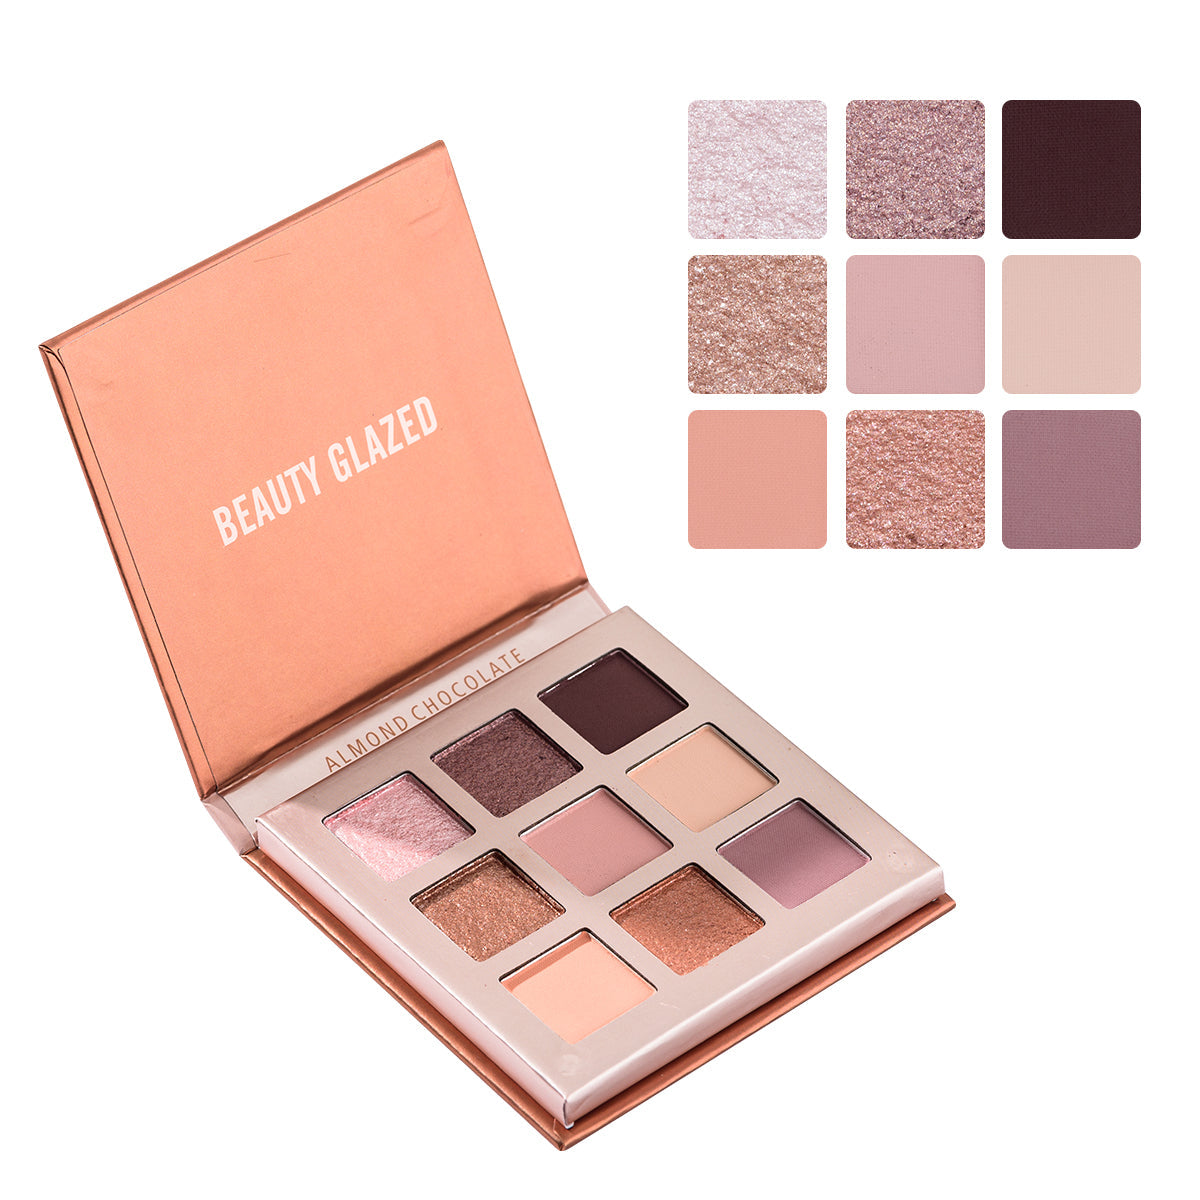 Selling the Sunset Palette